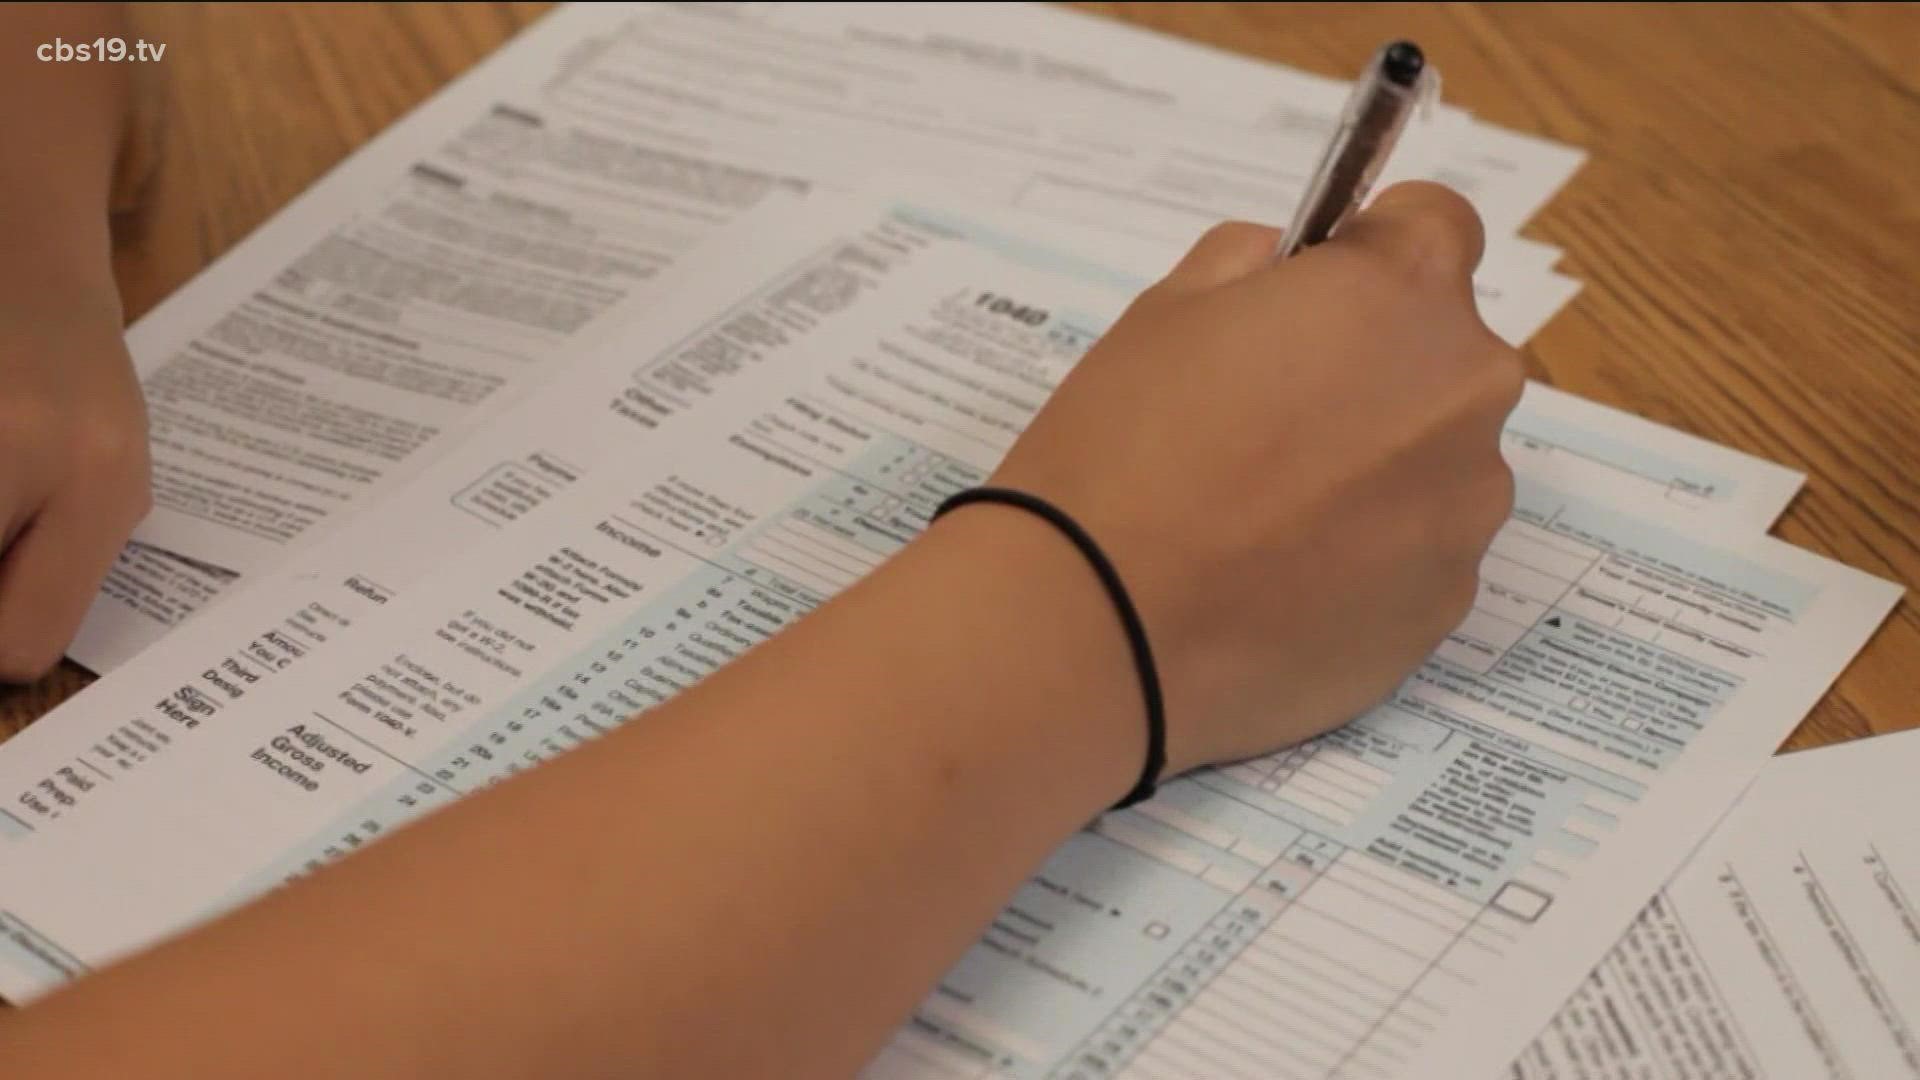 You'll need to spend today making sure you have all your paperwork and forms to file your taxes.